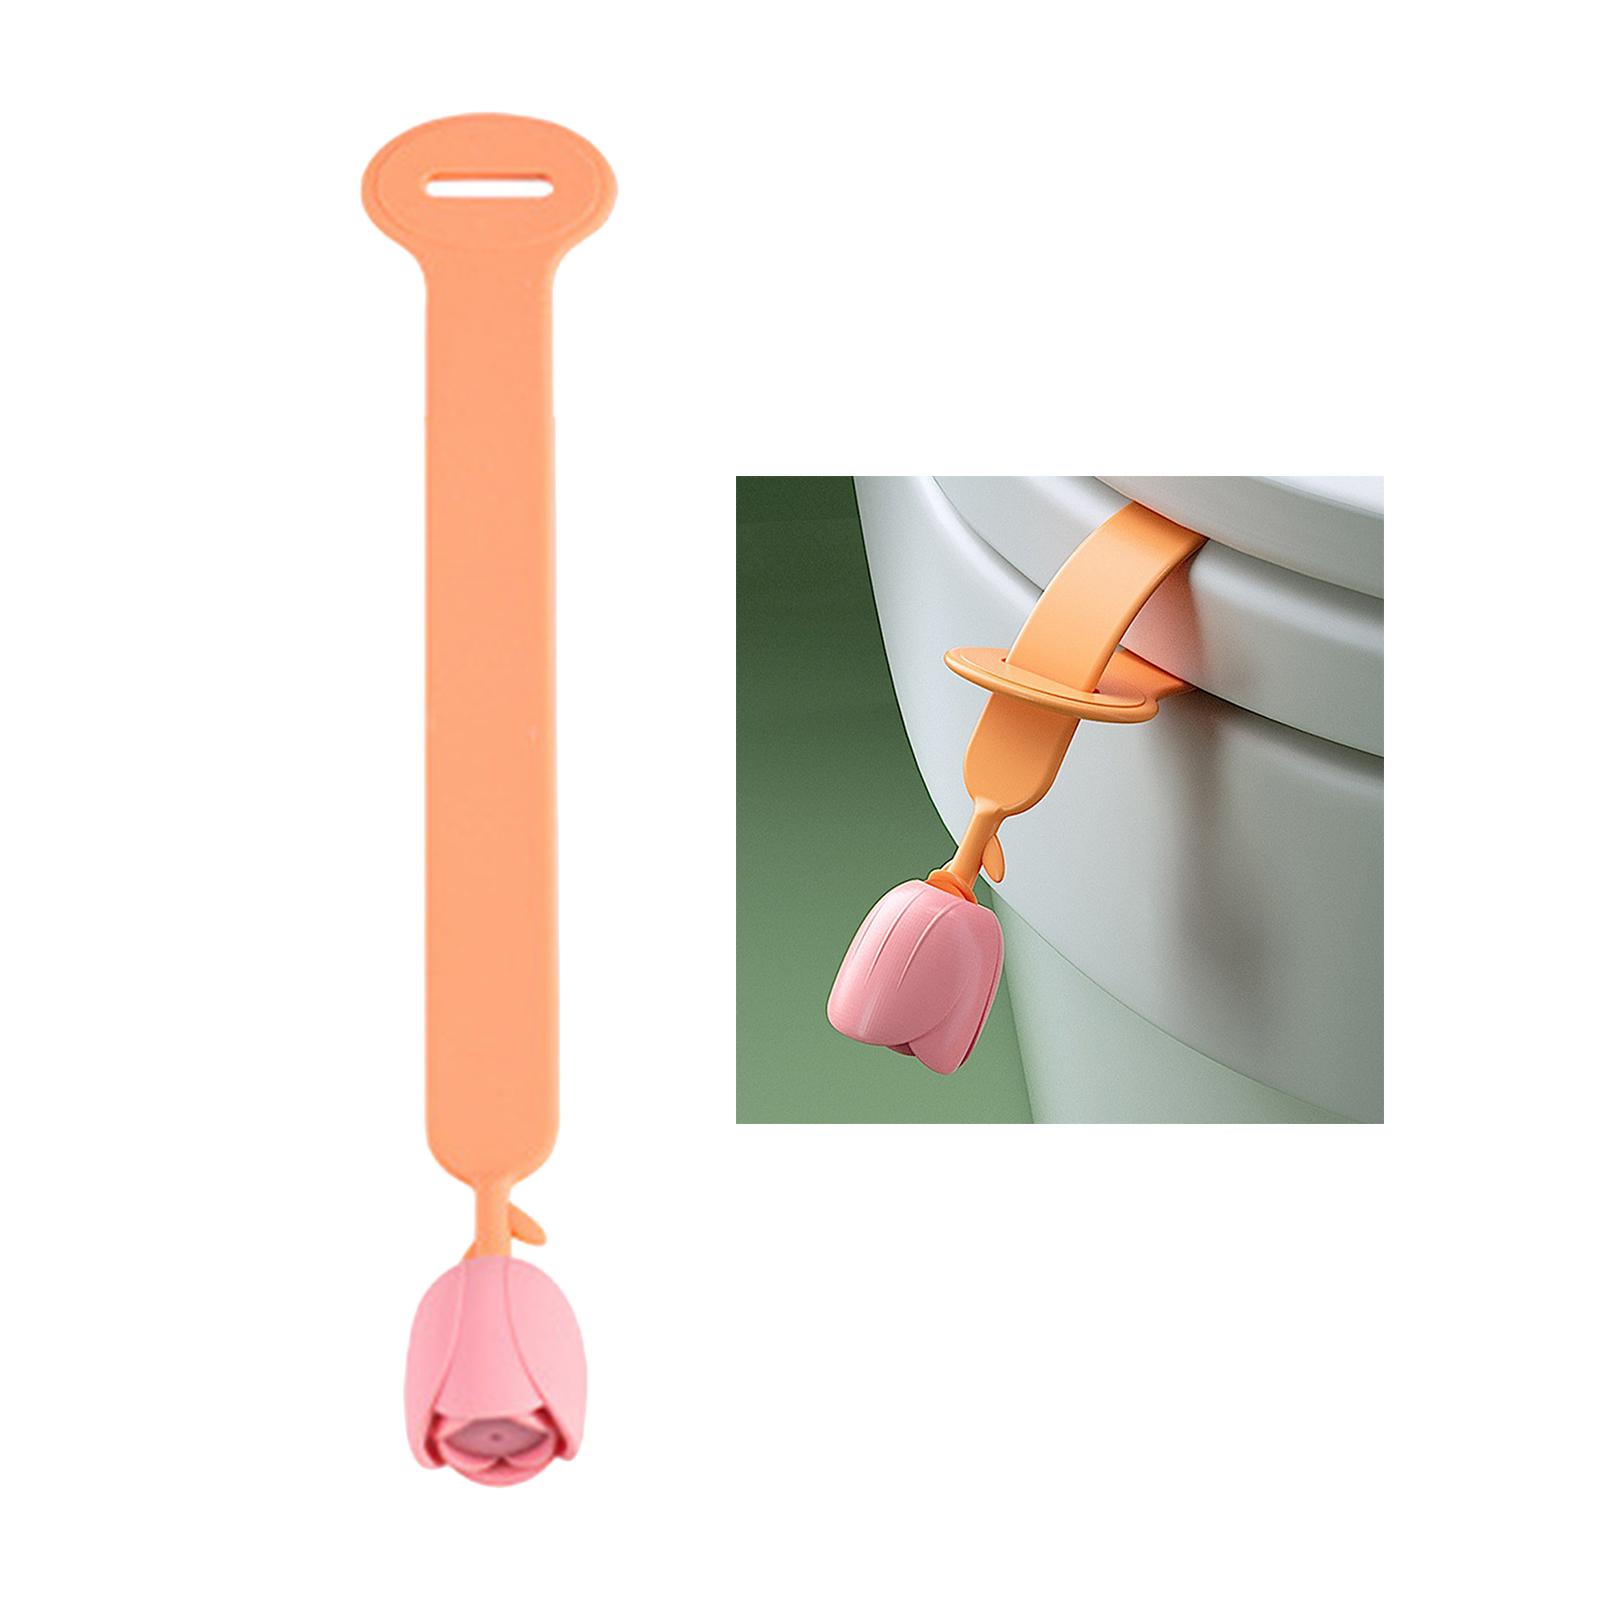 Floral Toilet Cover Lifter Avoid Touching Portable Lift Tool for Office Orange Seat Lifter